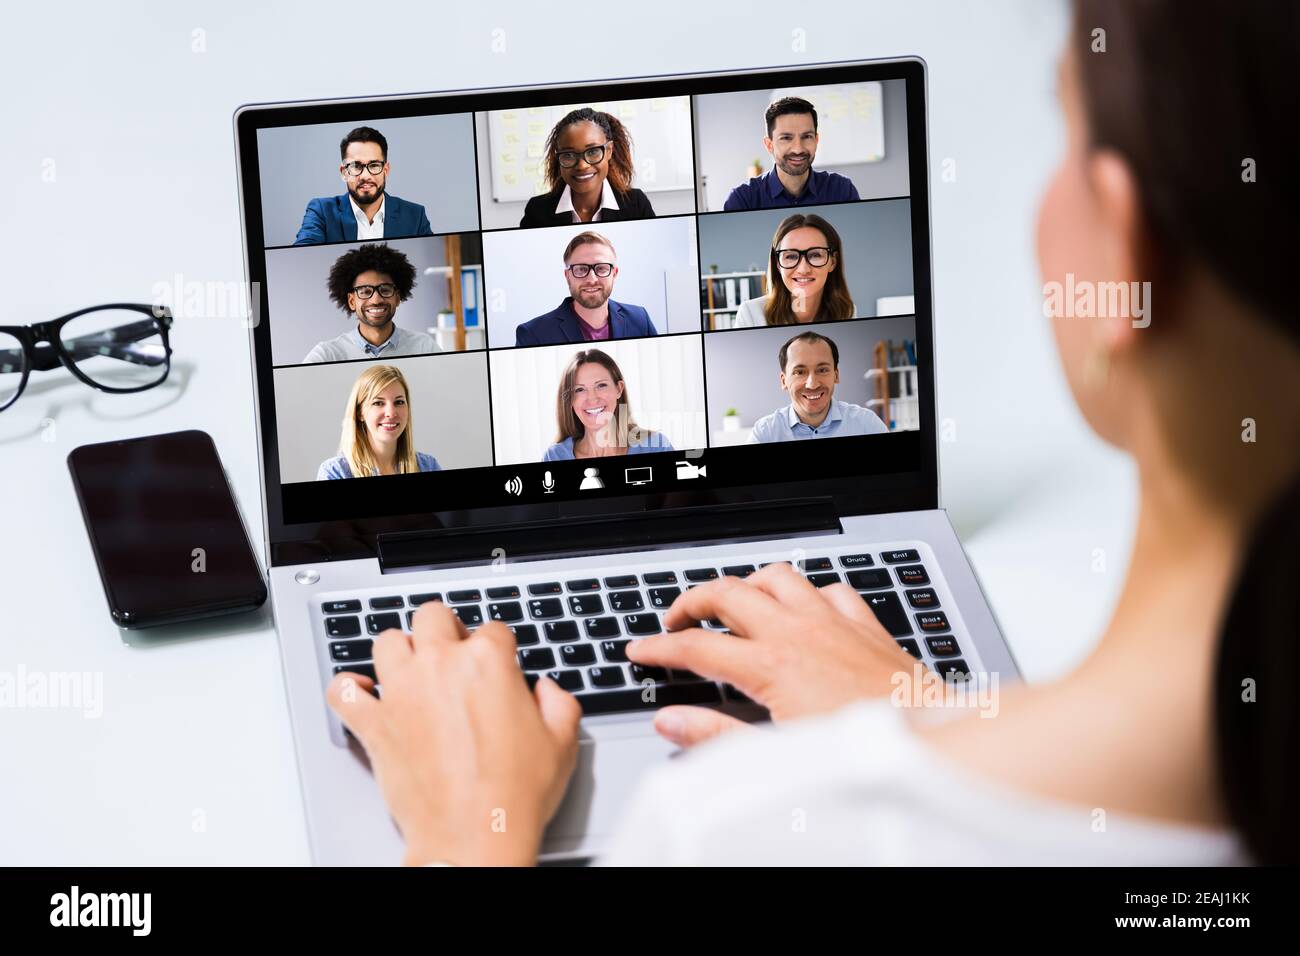 Work From  Home Online Video Conference Stock Photo